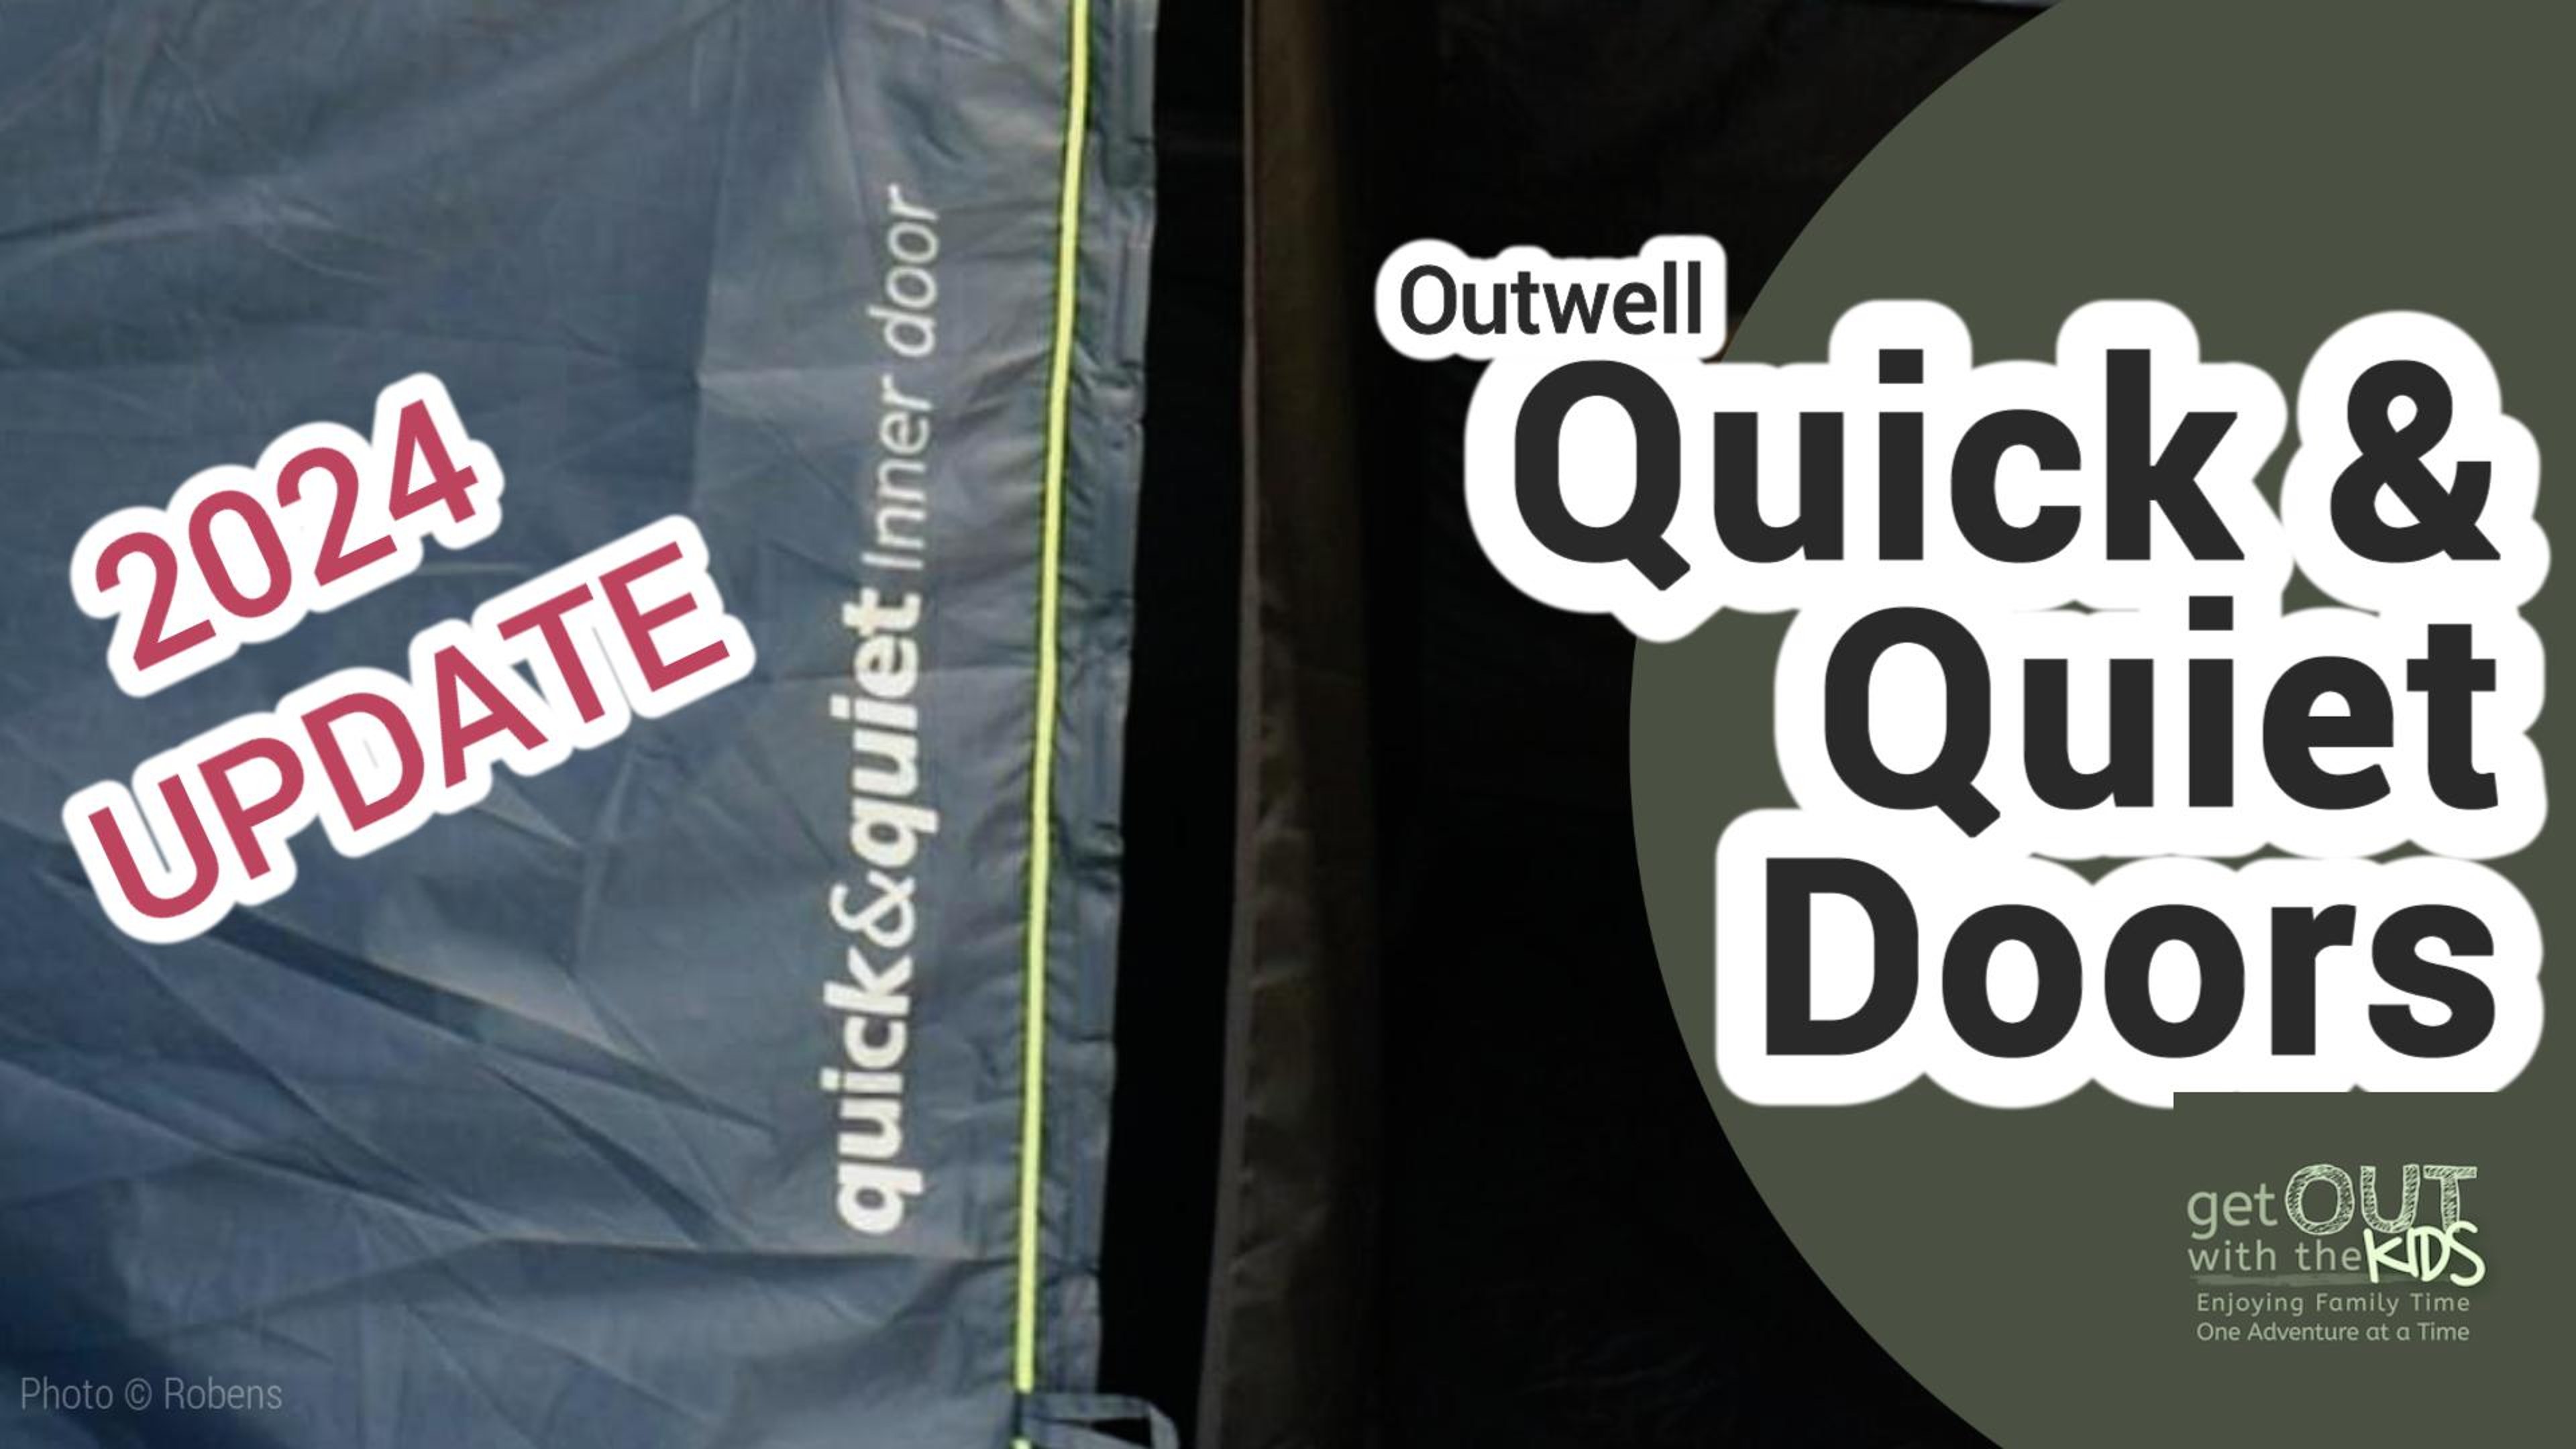 A quick and quiet door on a new Outwell Tent